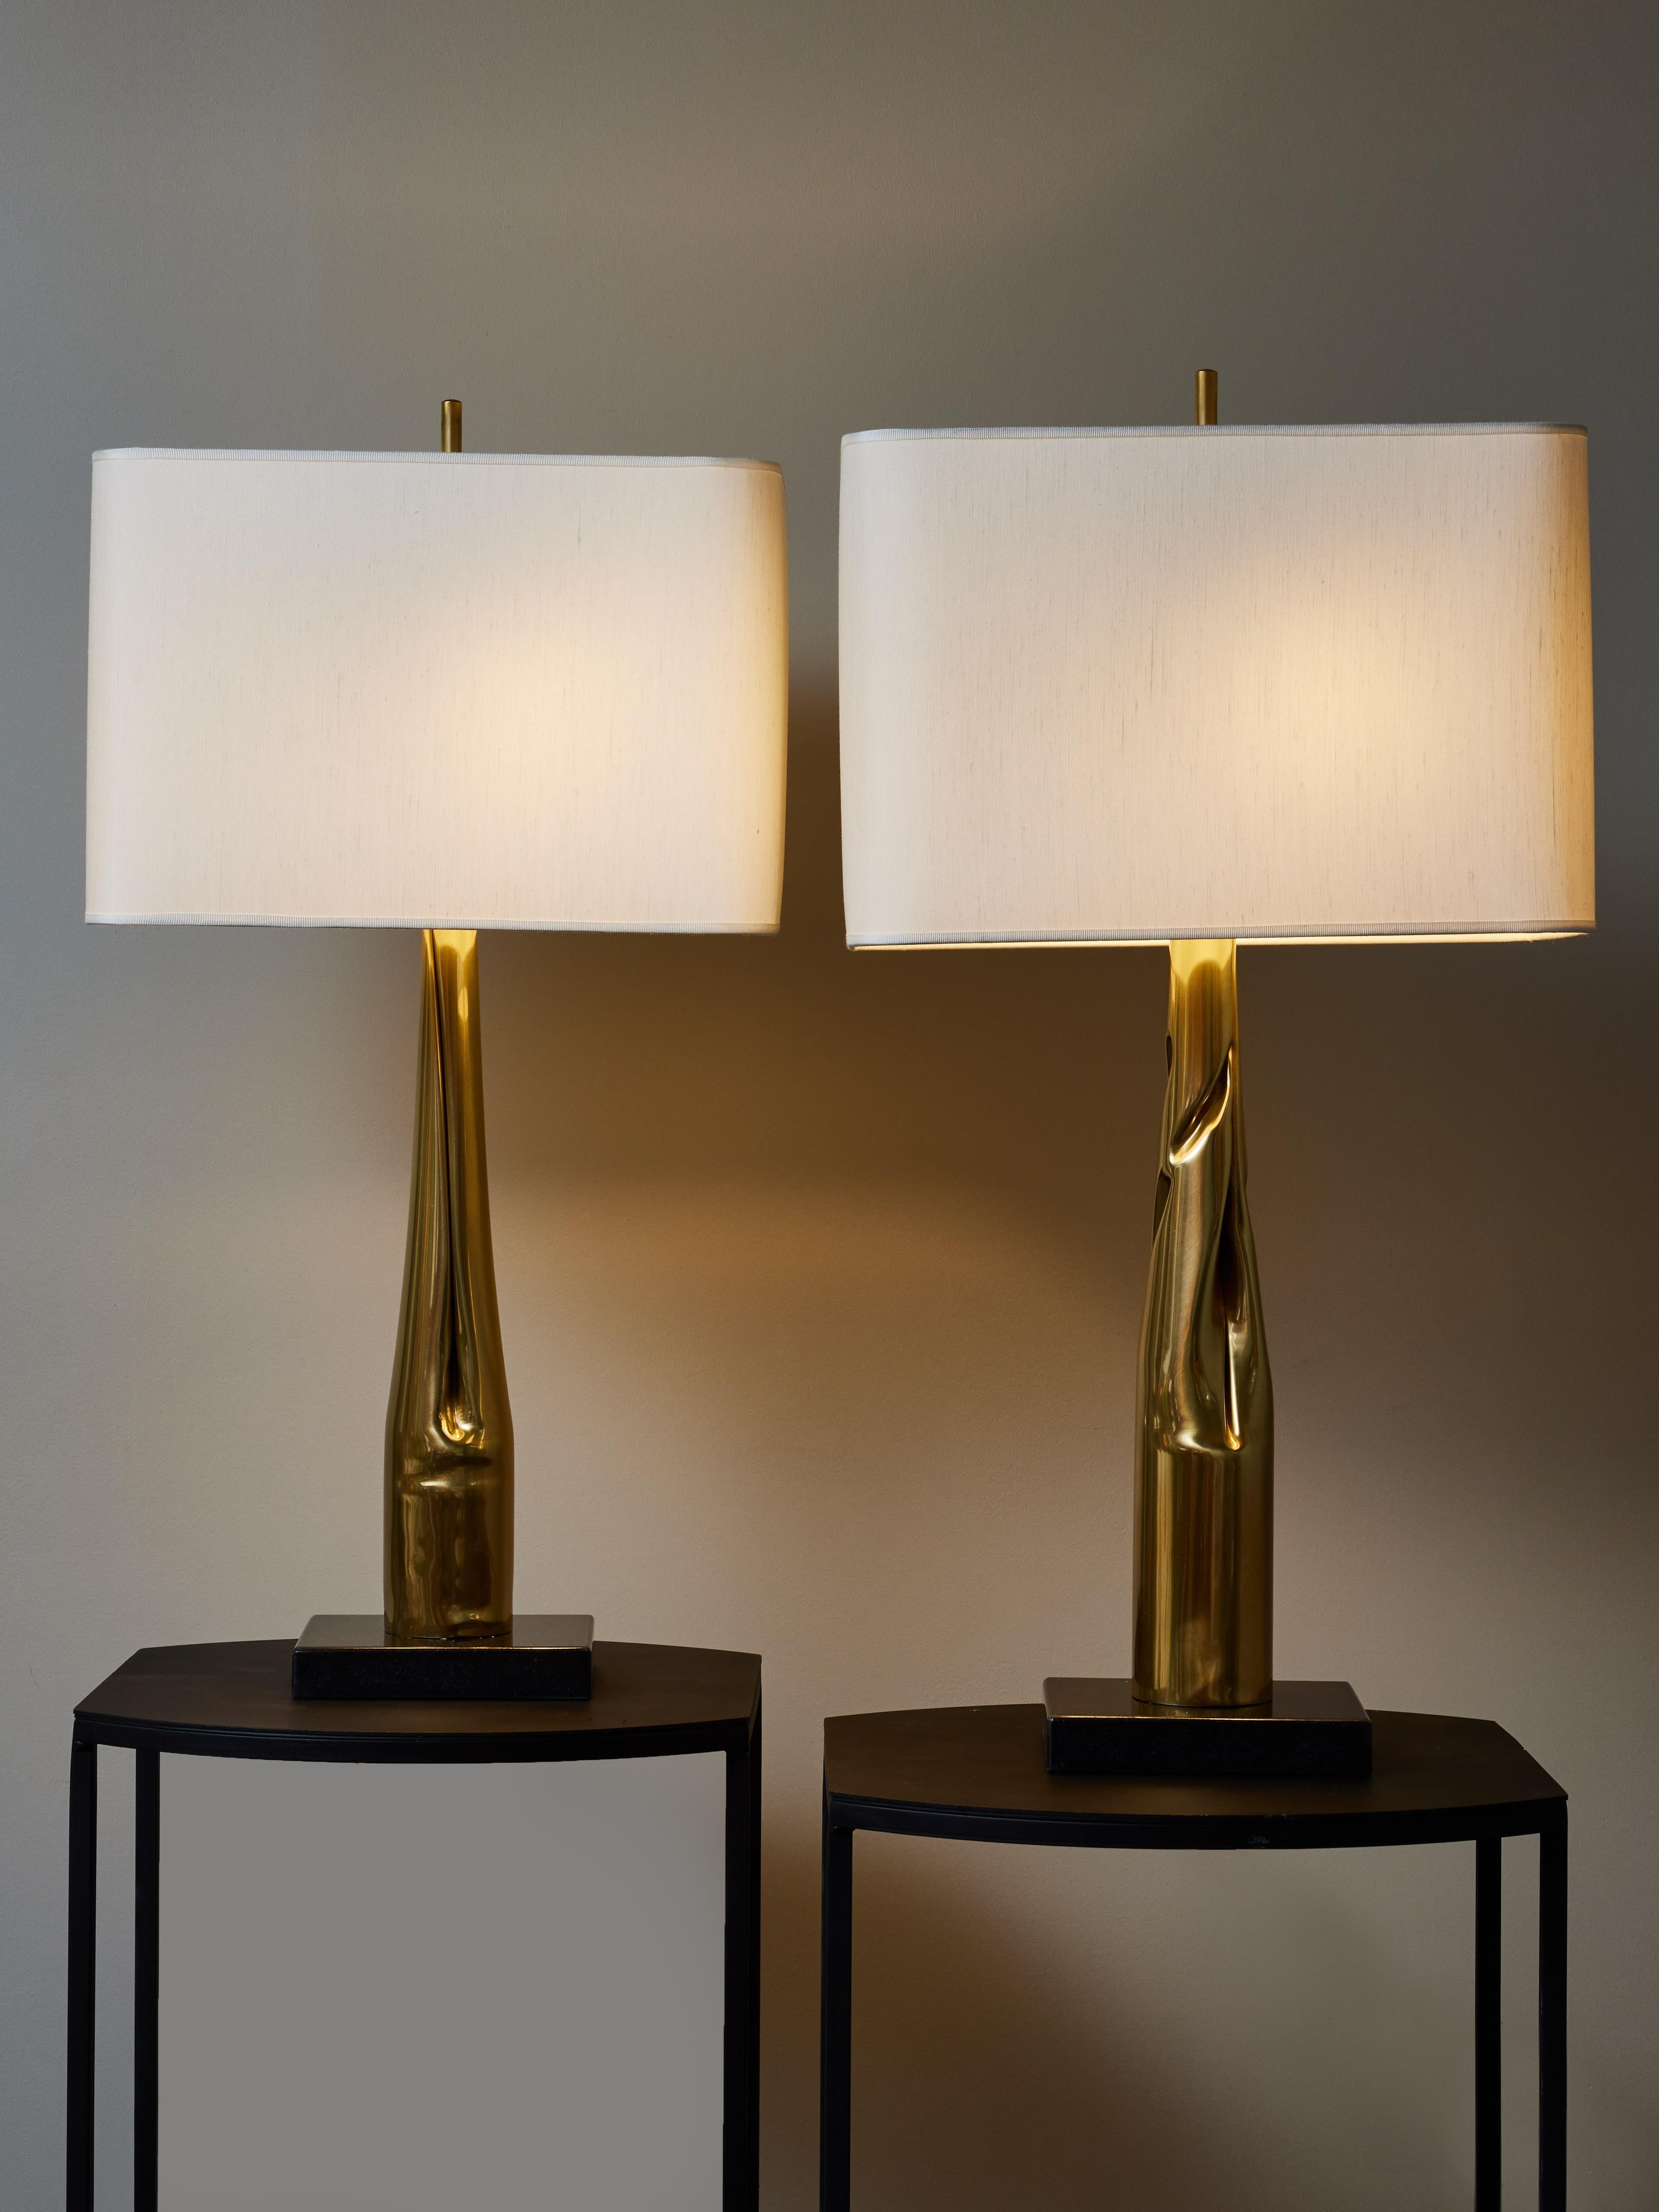 Pair of table lamps made of a rectangular black marble base and a long randomly folded brass piece, holding two sources of light.

Made by Esperia exclusively for Glustin Luminaires.